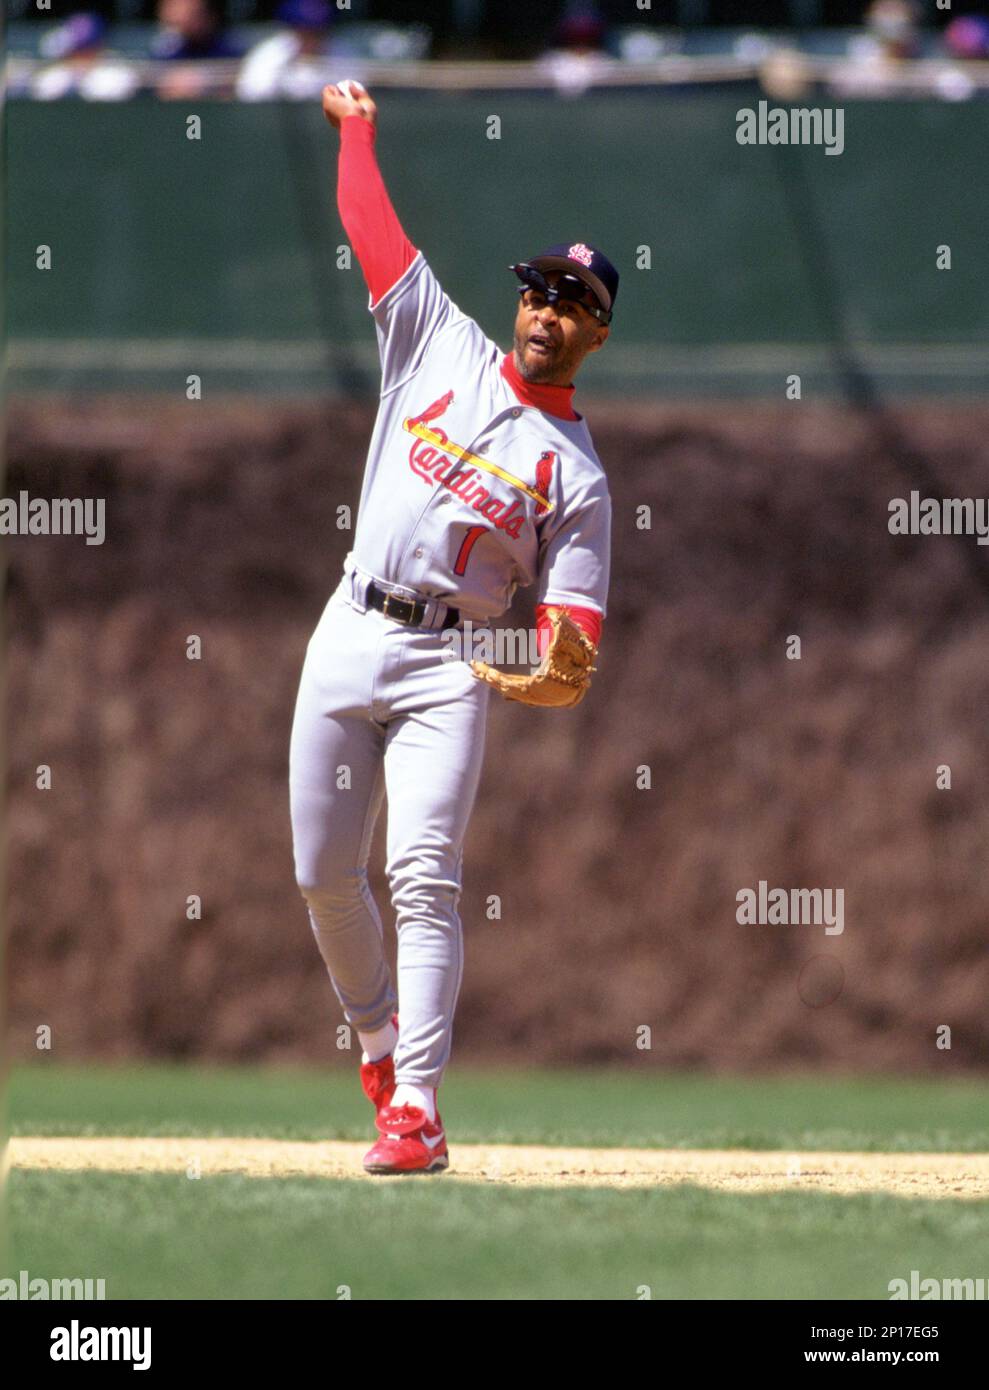 St. Louis Cardinals Ozzie Smith(1) in action during a game from his 1983  season. Ozzie Smith played for 19 years with 2 different teams and was a  15-time All-Star and was inducted